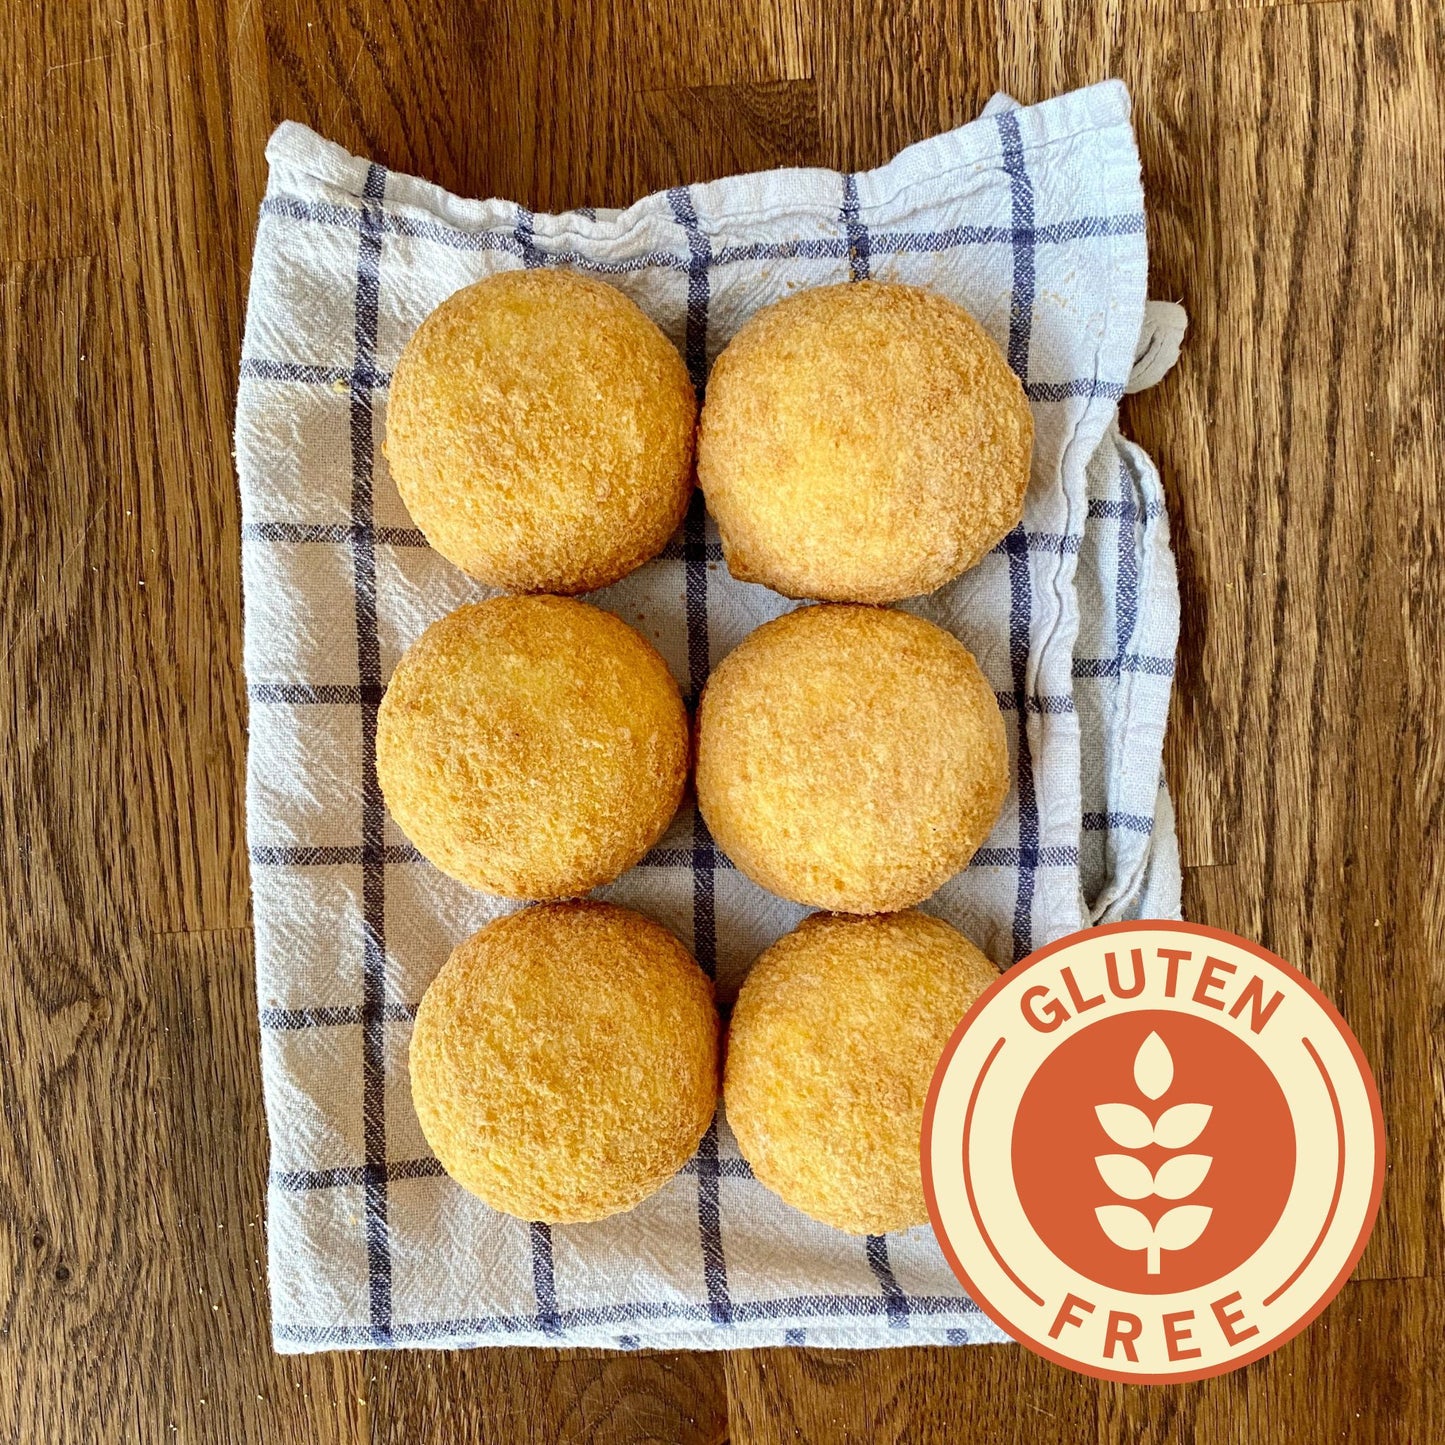 Gluten Free - Cooked Large Rice Balls - 6 Pack